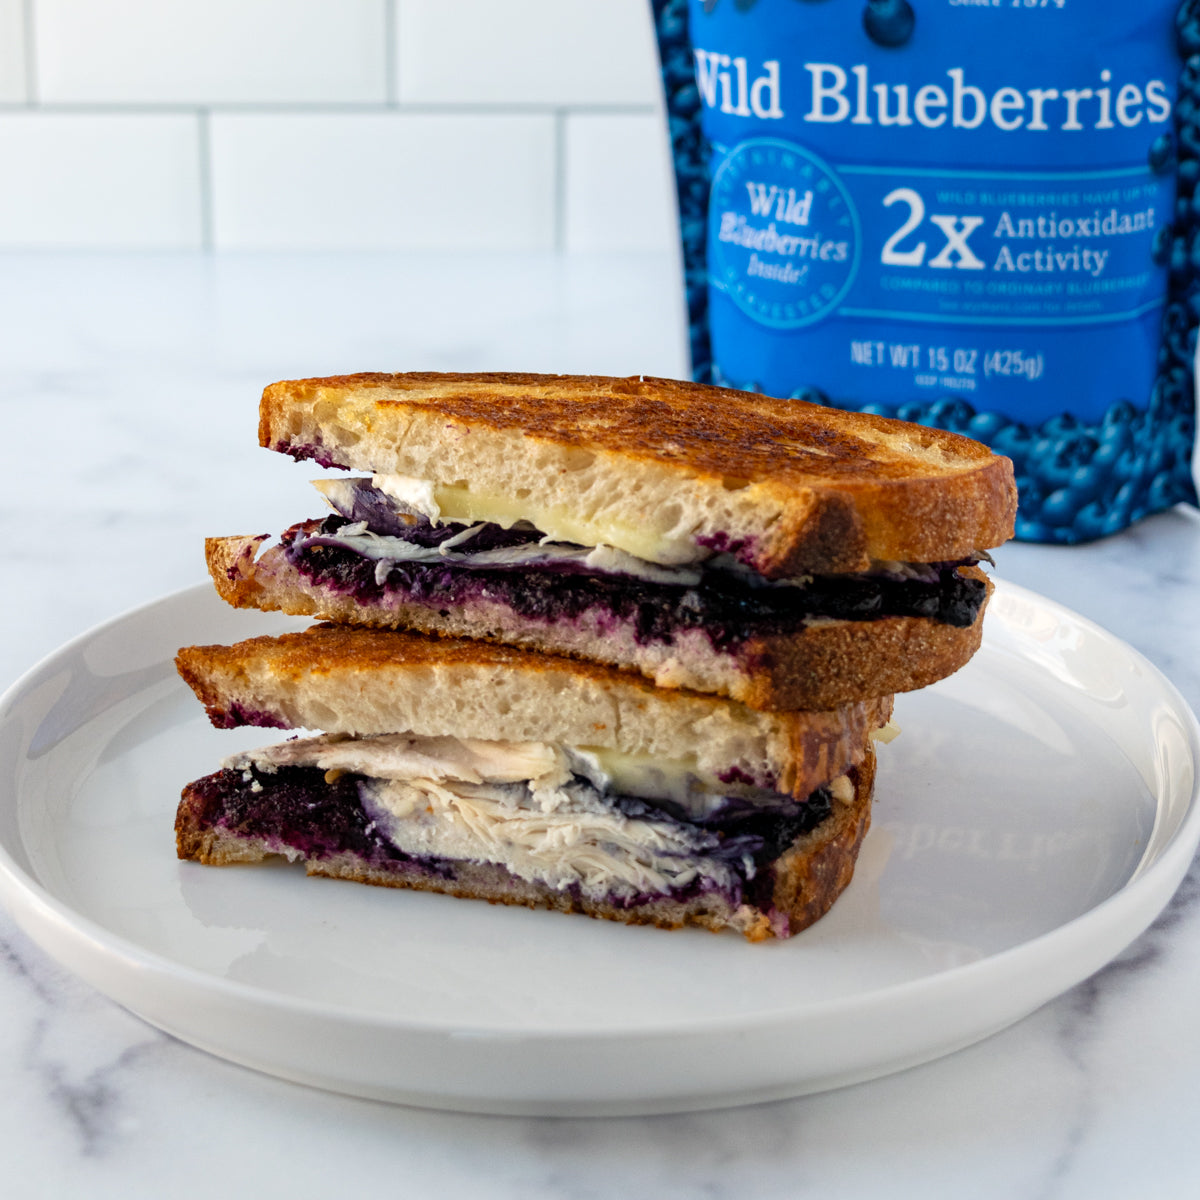 Turkey and Brie Grilled Cheese with Wild Blueberry Jam